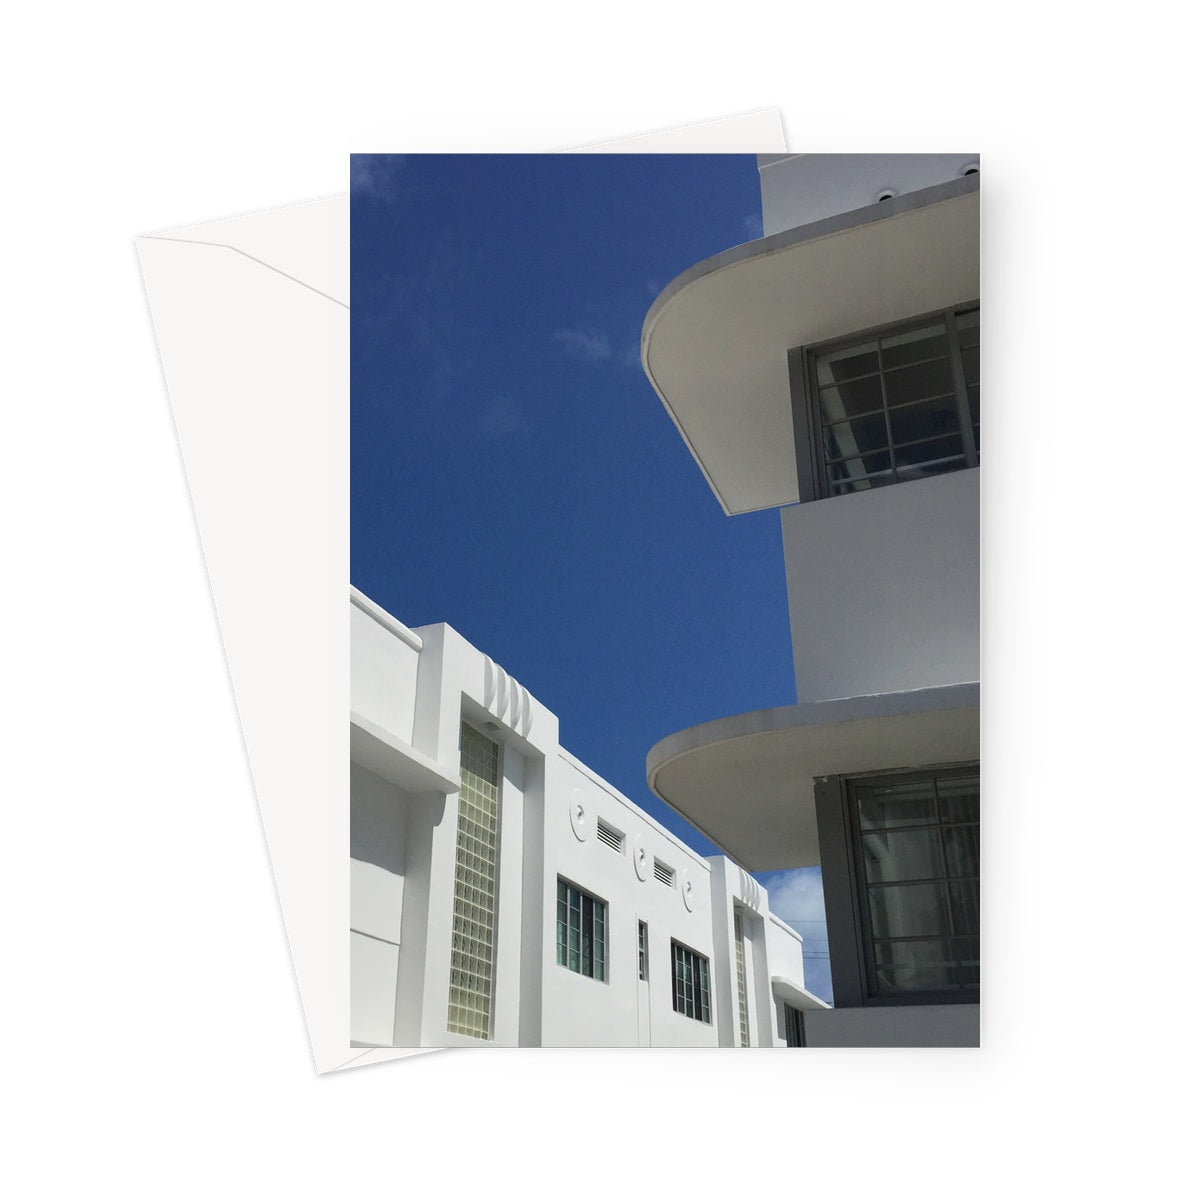 This greeting card shows two white Art Deco buildings with geometric shapes and patterning.